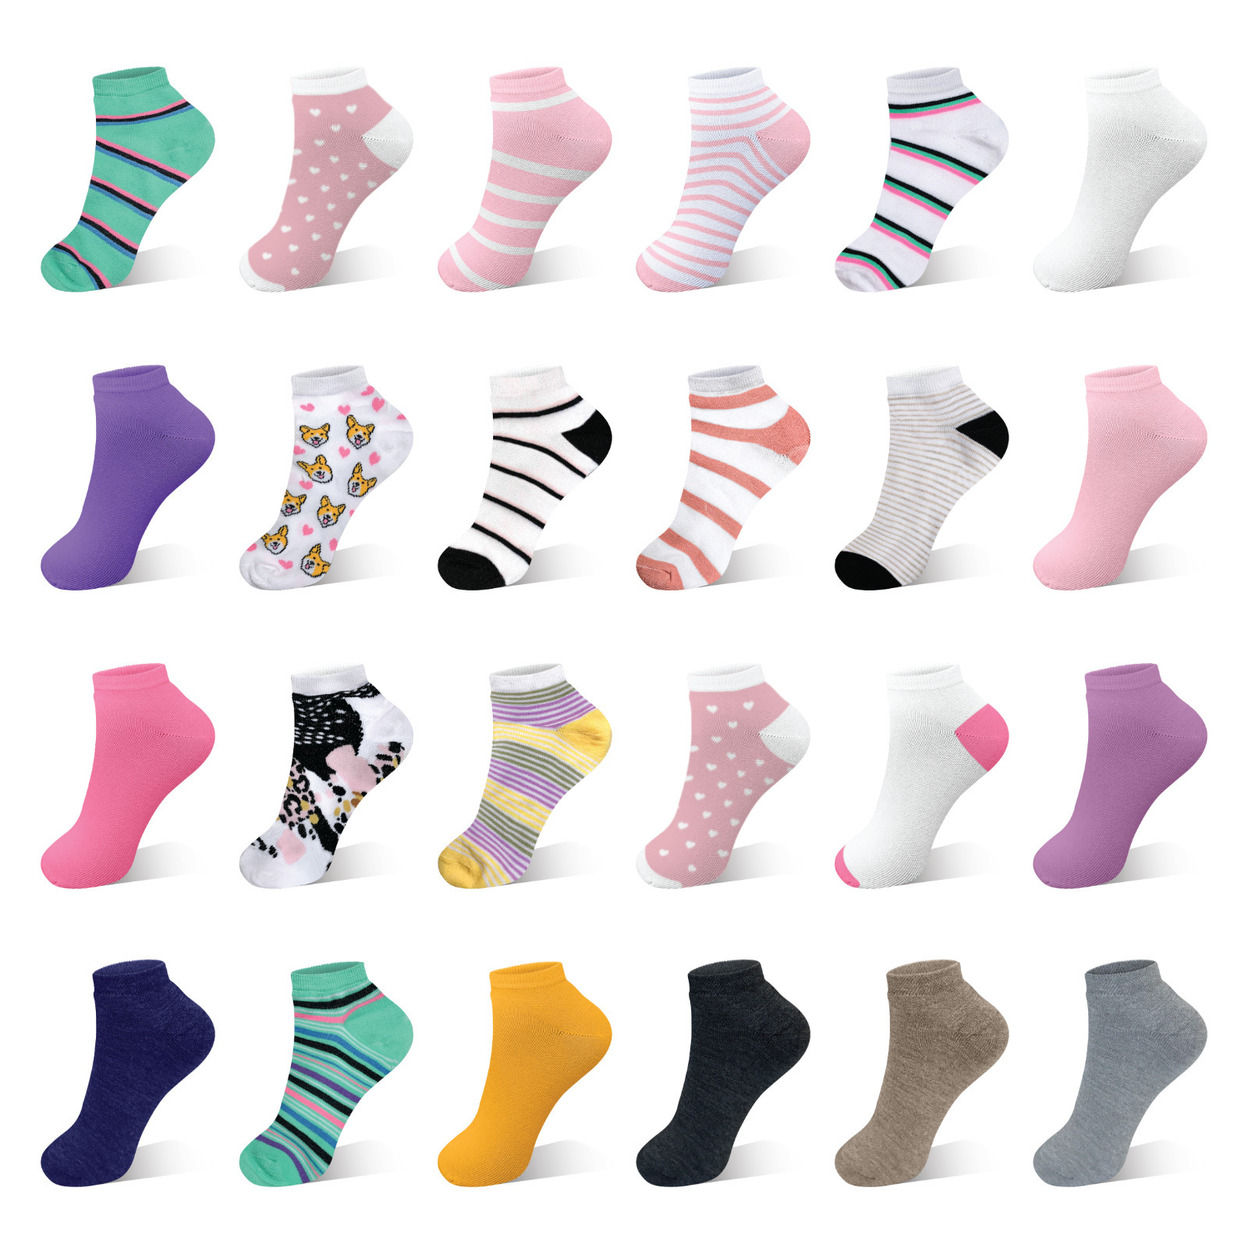 10-Pairs: Women’s Breathable Fun-Funky Colorful No Show Low Cut Ankle Socks